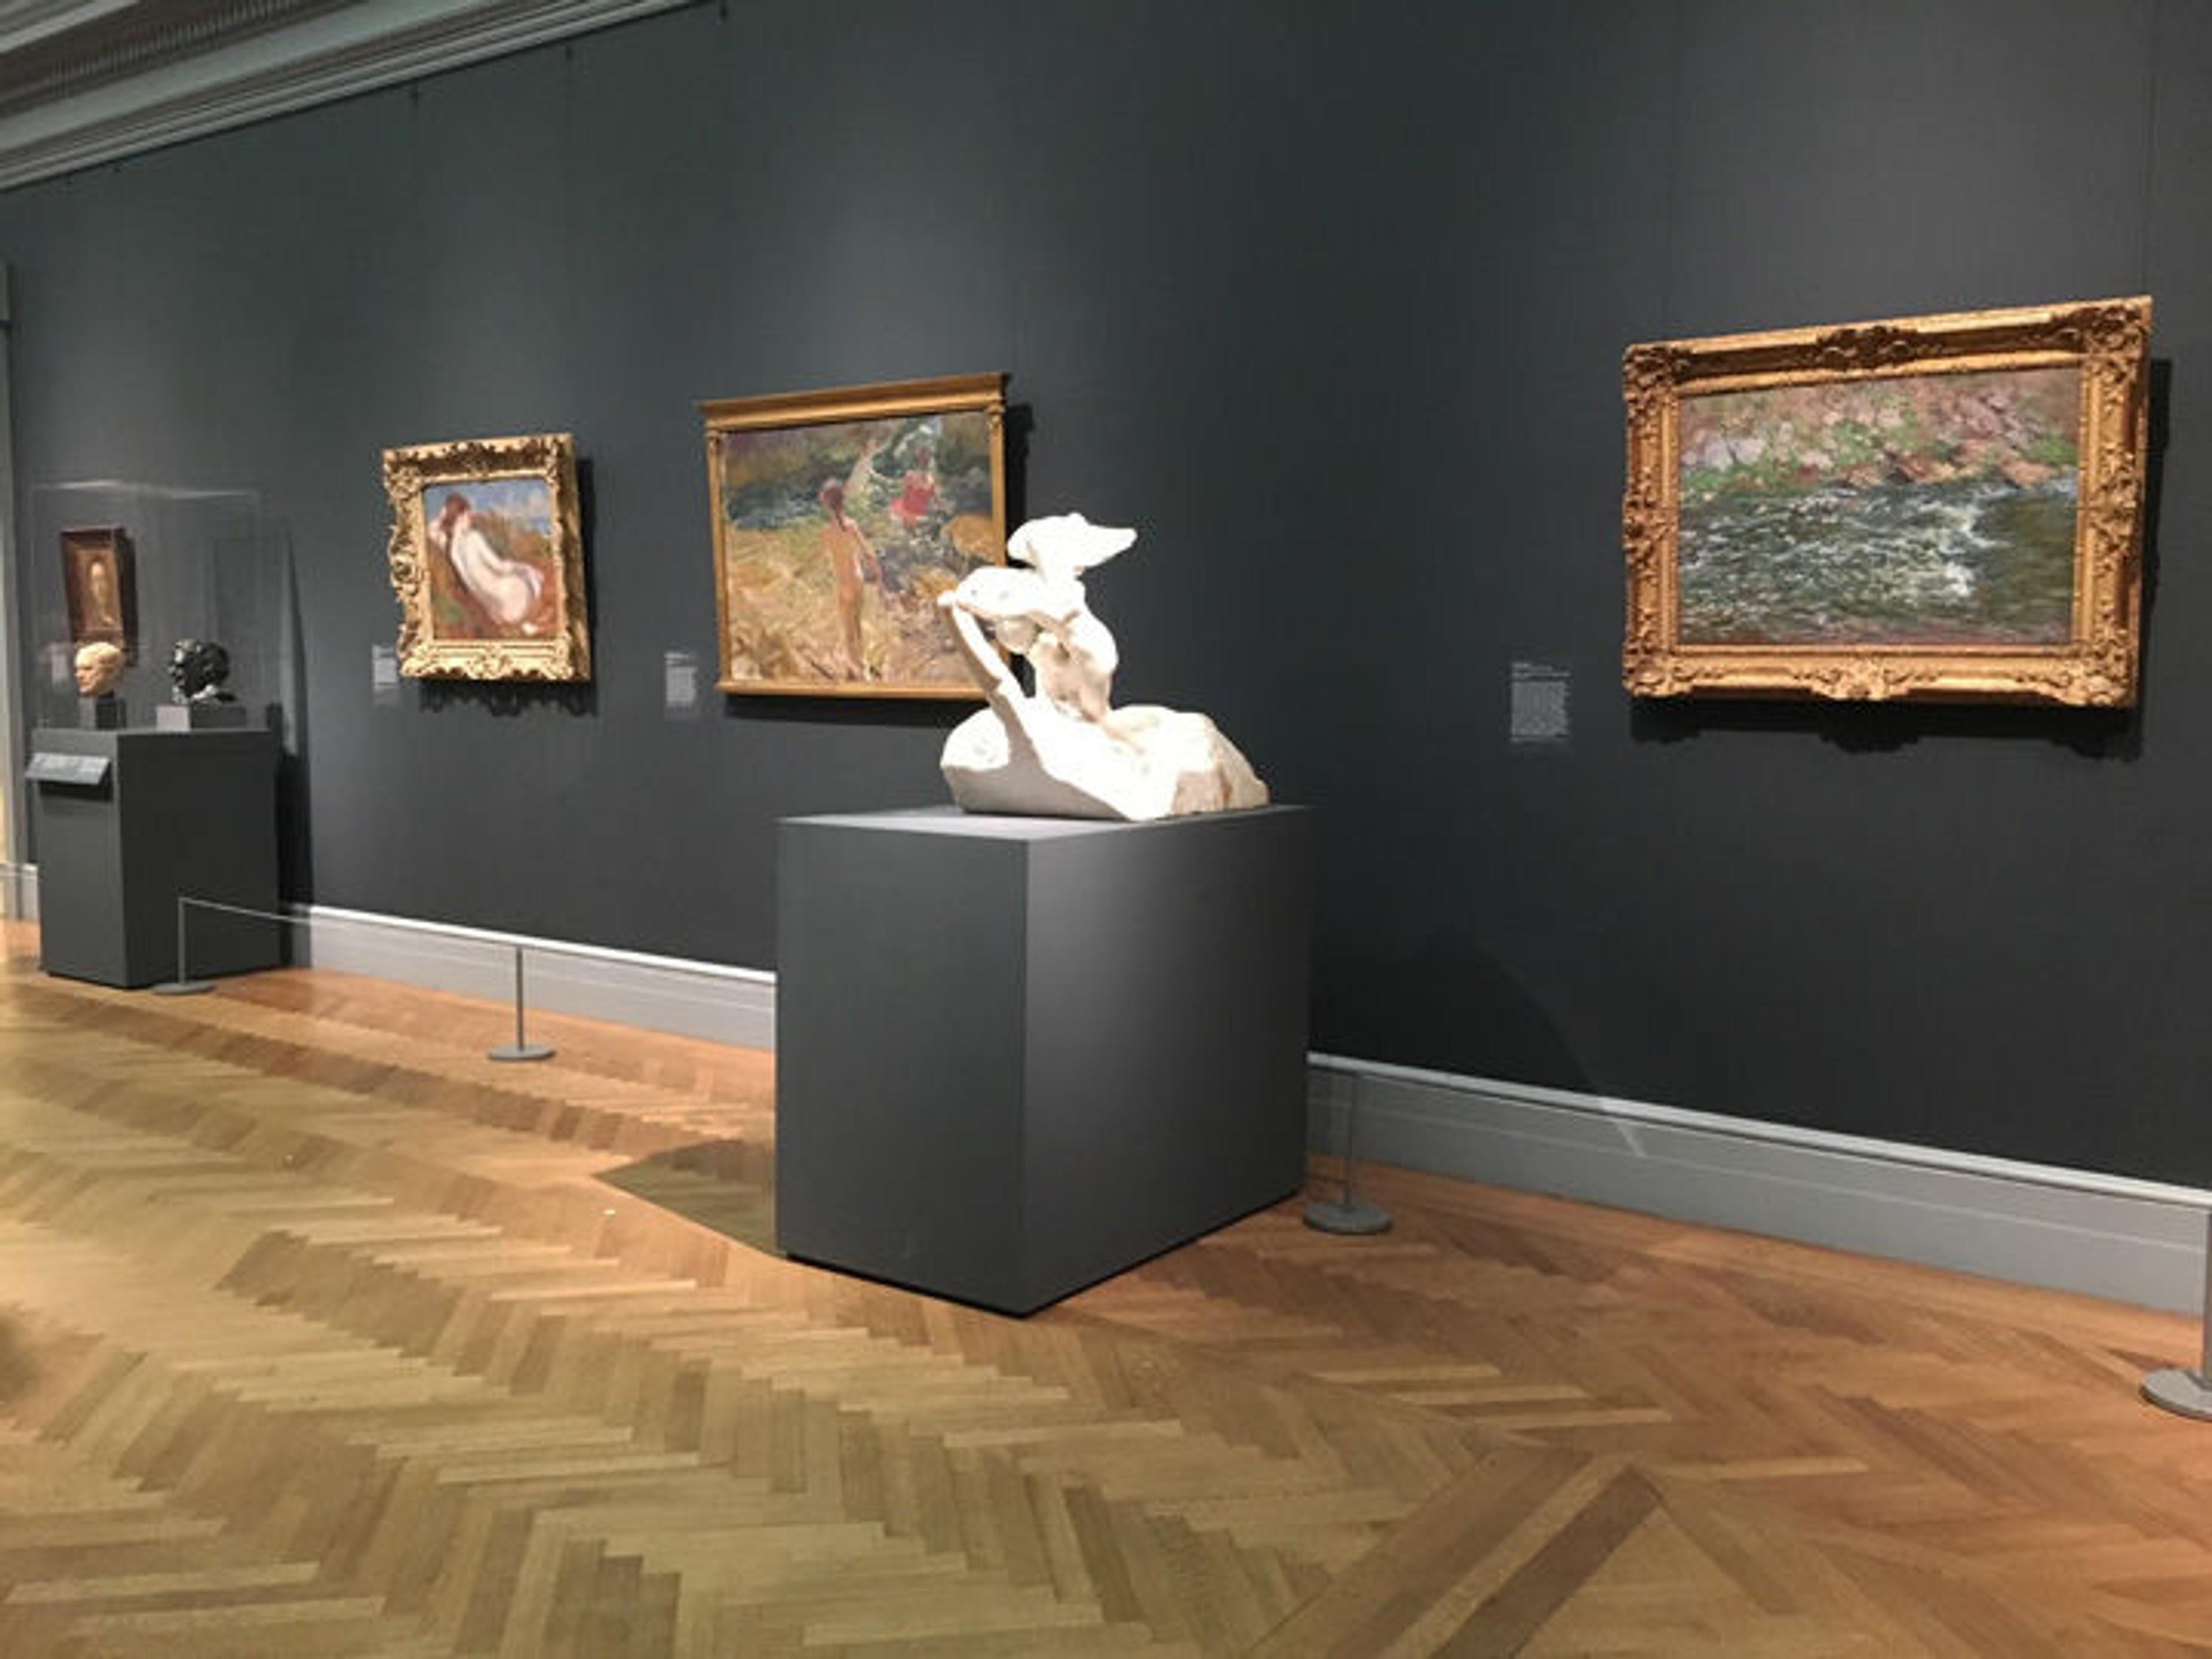 Gallery view of Rodin at The Met